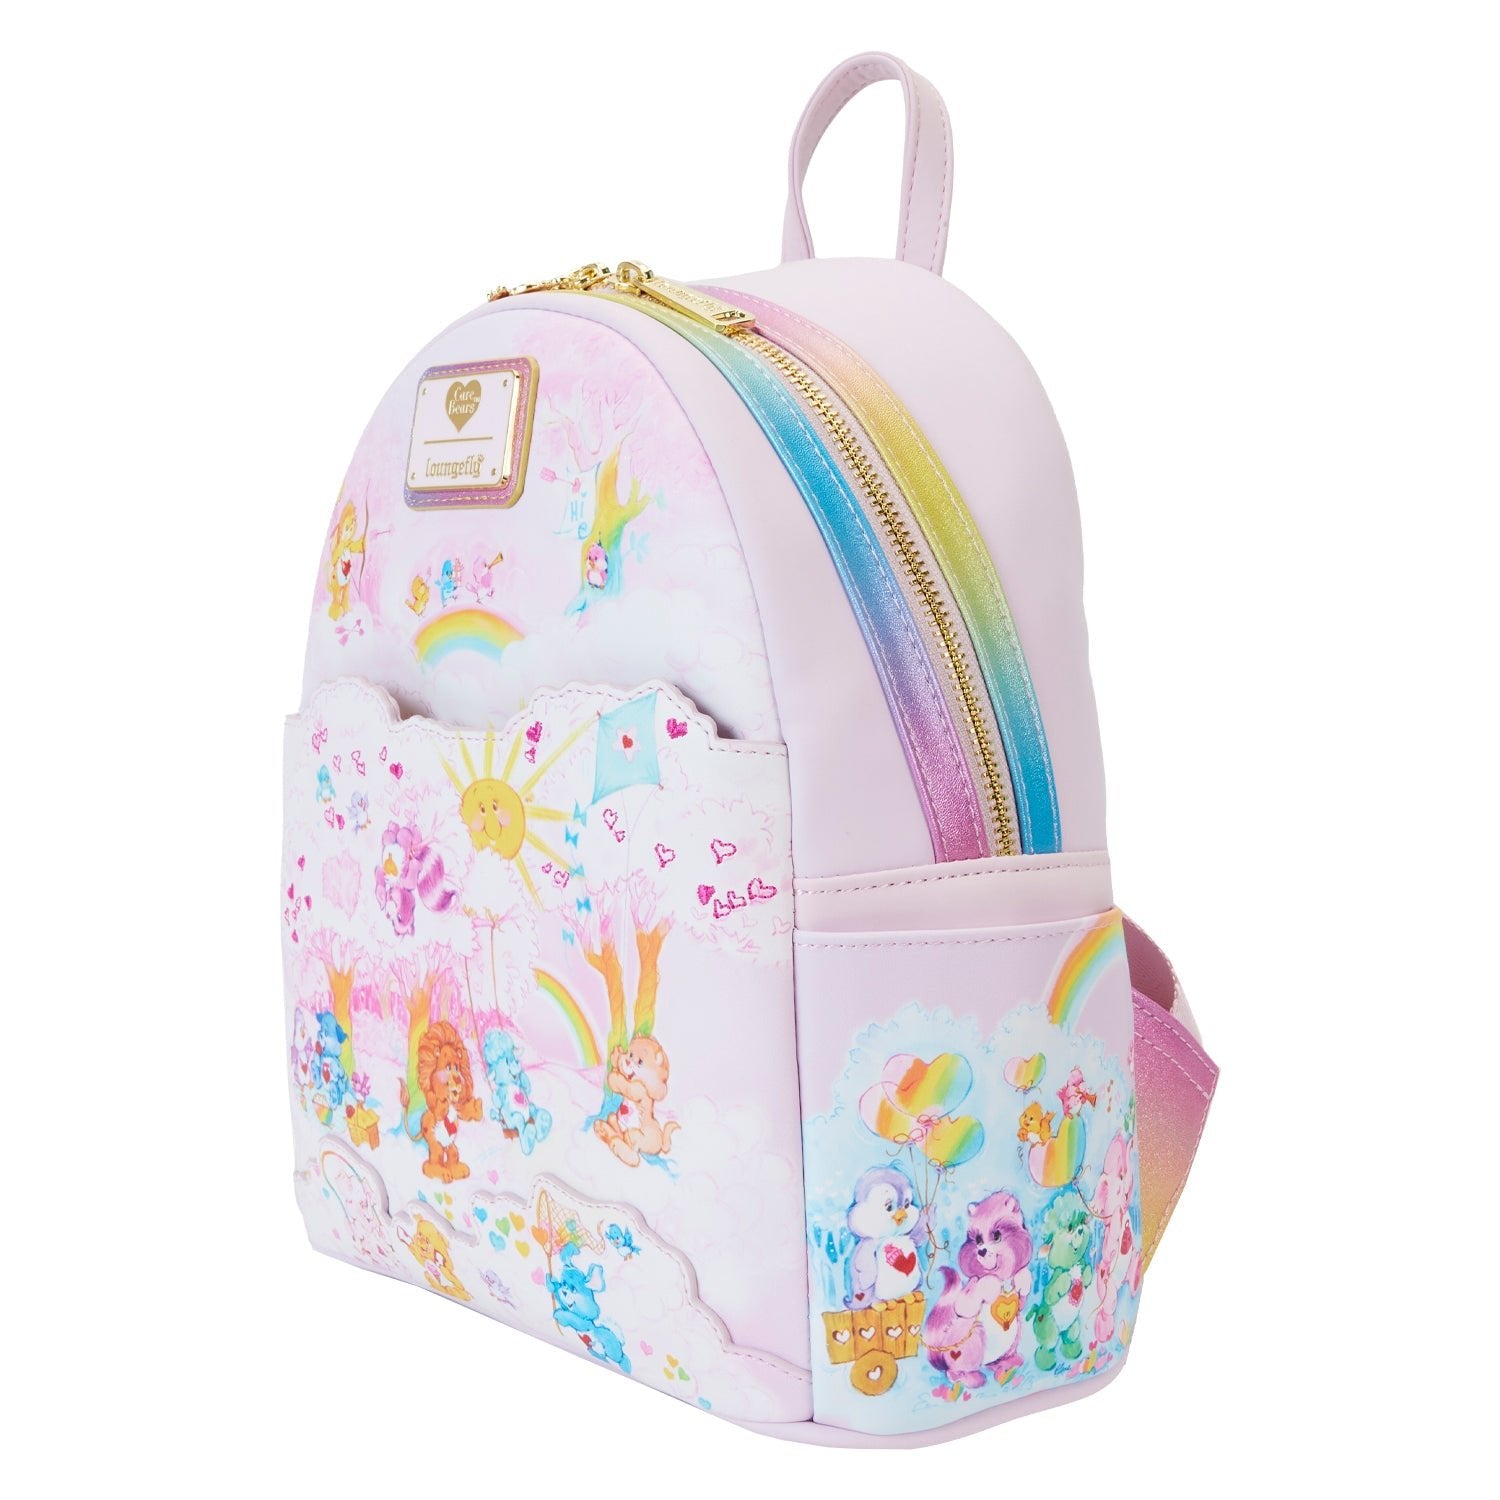 Loungefly x Care Bears Cousins Cloud Crew Mini Backpack - GeekCore